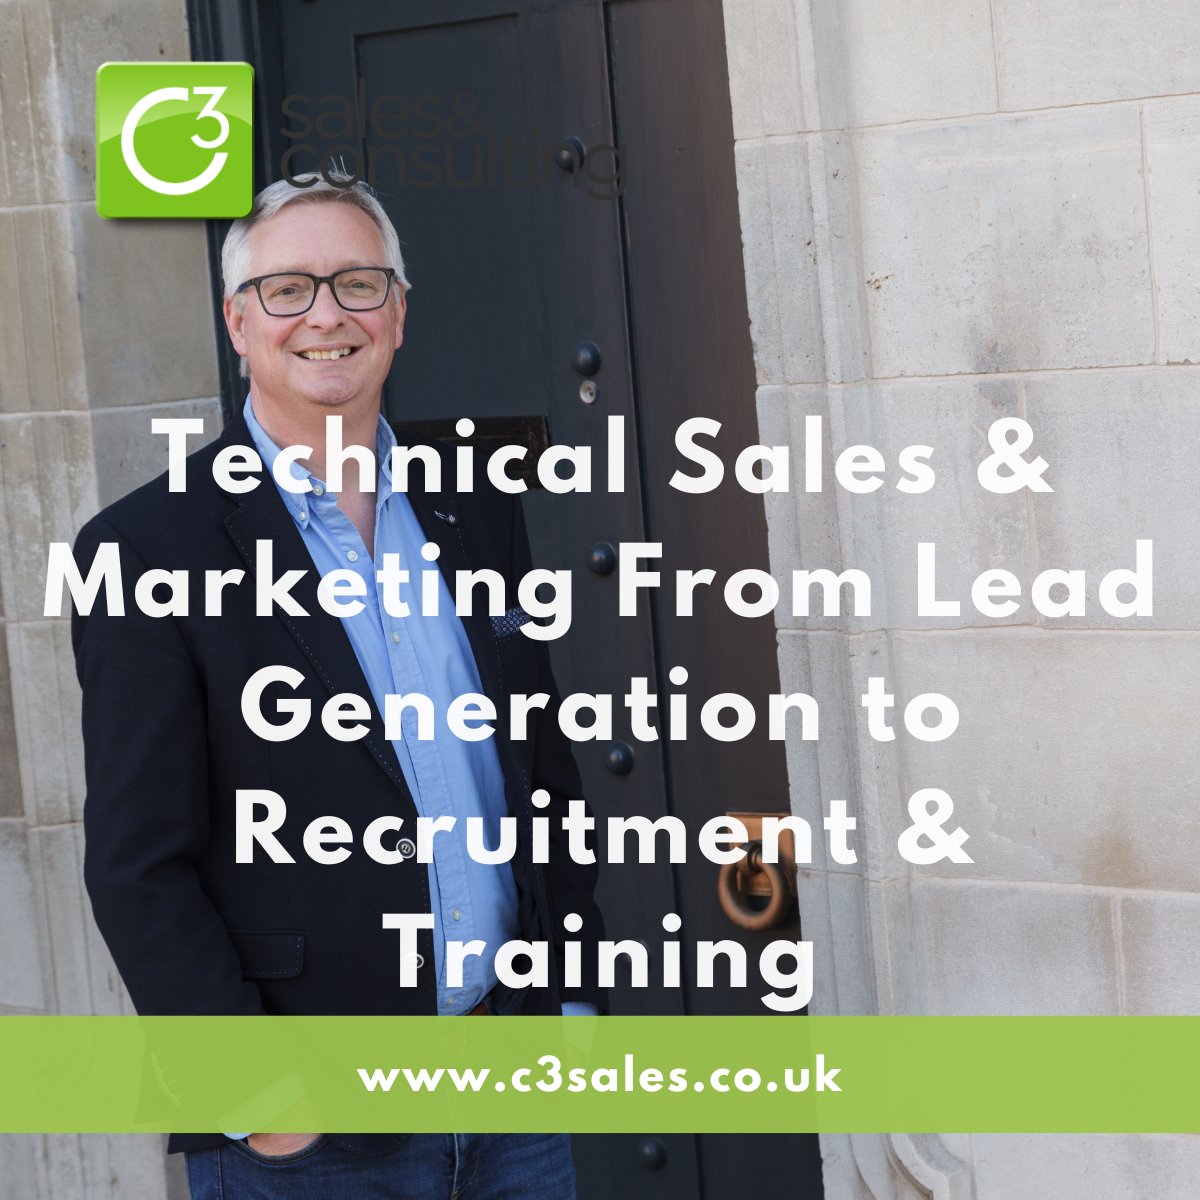 At C3 Sales, we have nearly four decades of experience spanning the energy, engineering, and manufacturing sectors. Let's recruit, train, and generate leads together. From strategy to CRM, we've got you covered. 

#TechnicalSales #SalesRecruitment #LeadGeneration #MarketExpansion